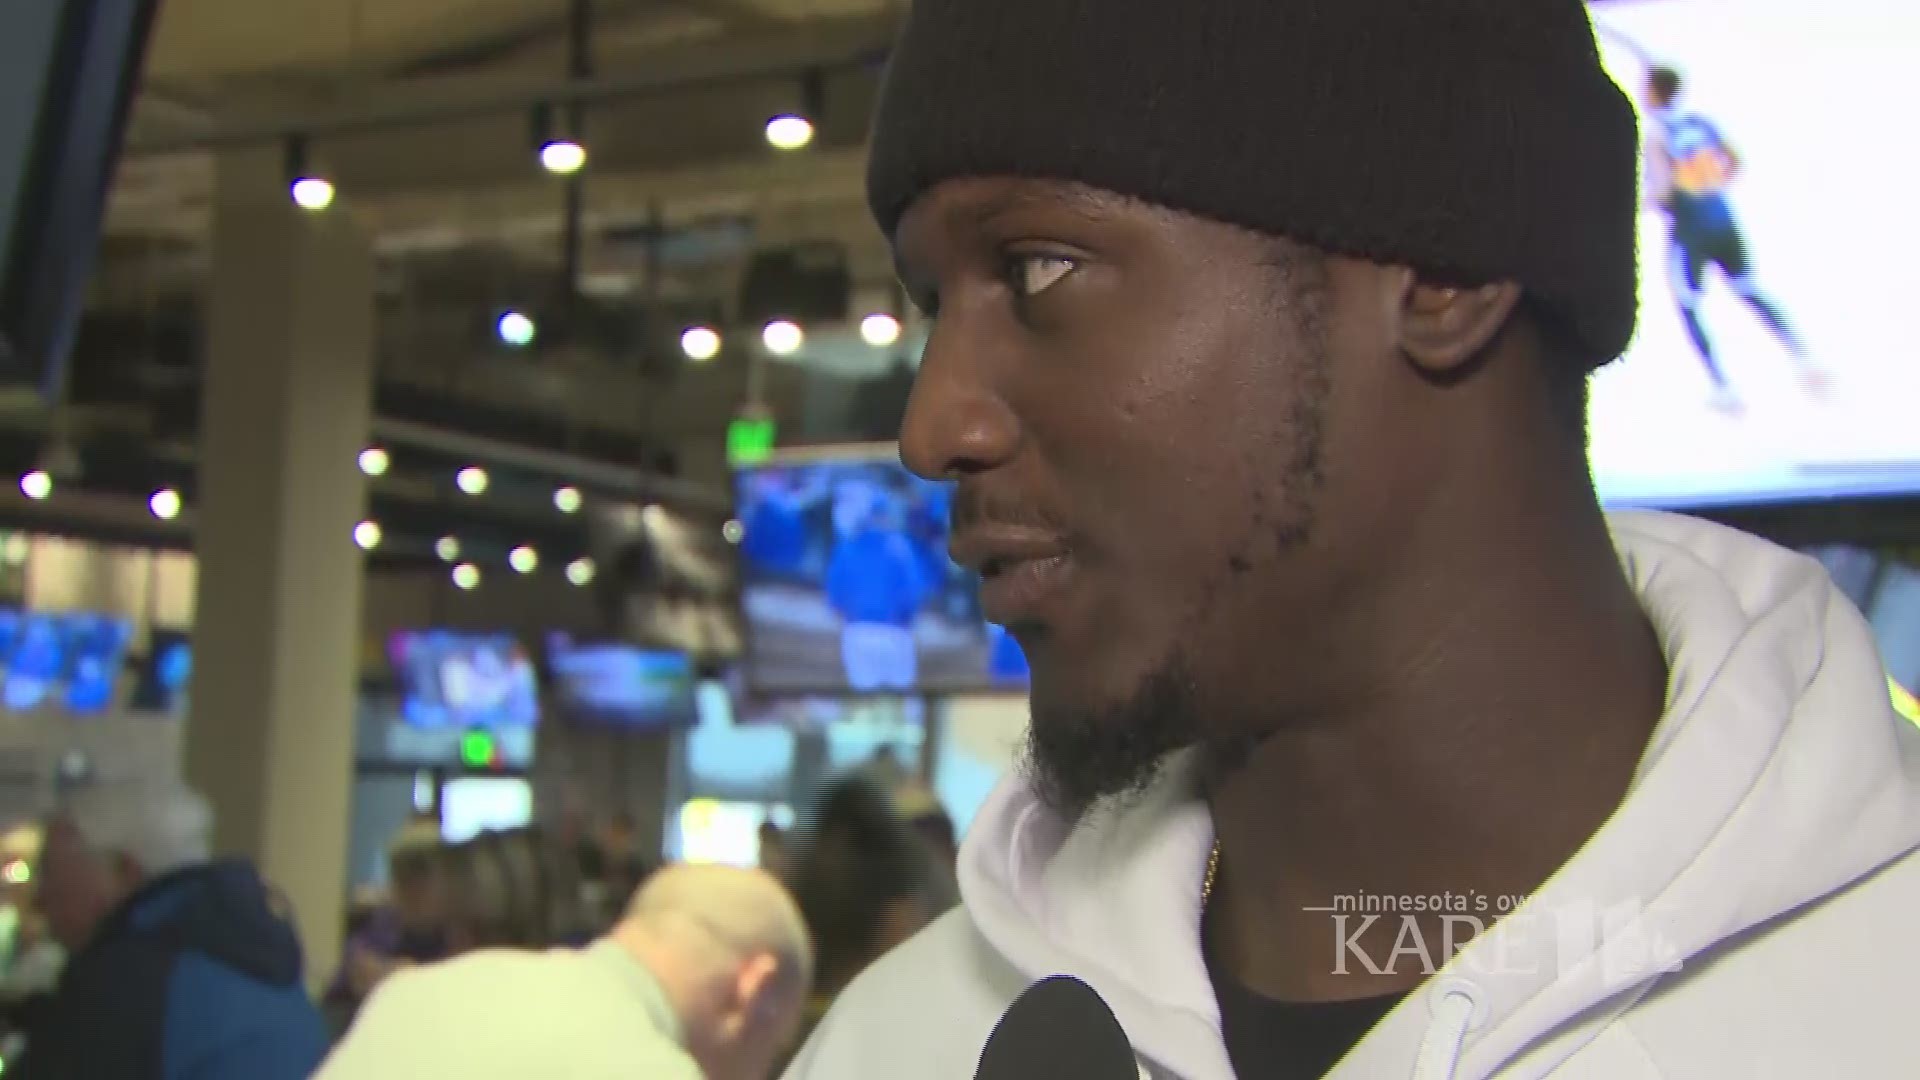 At an appearance at Buffalo Wild Wings in Edina, Vikings Cornerback Xavier Rhodes talks about why its important for him to give back to the community (and talks a little football too).